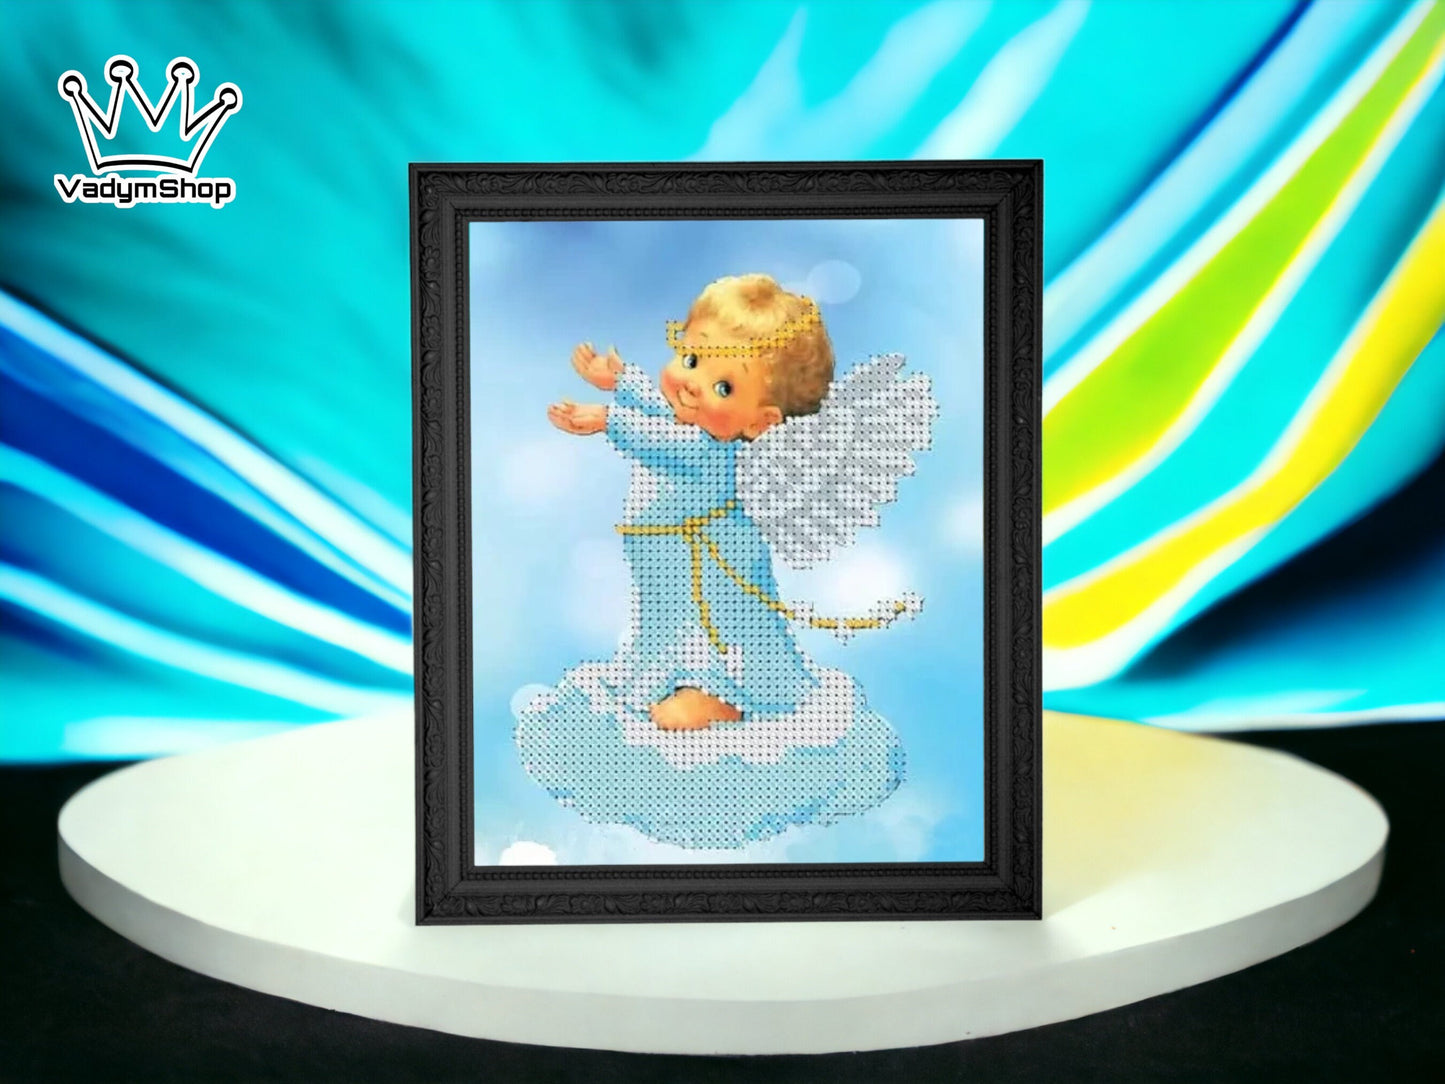 Small Bead embroidery kit "Angel on the cloud". Size: 5.5-6.7 in (14-17cm) - VadymShop